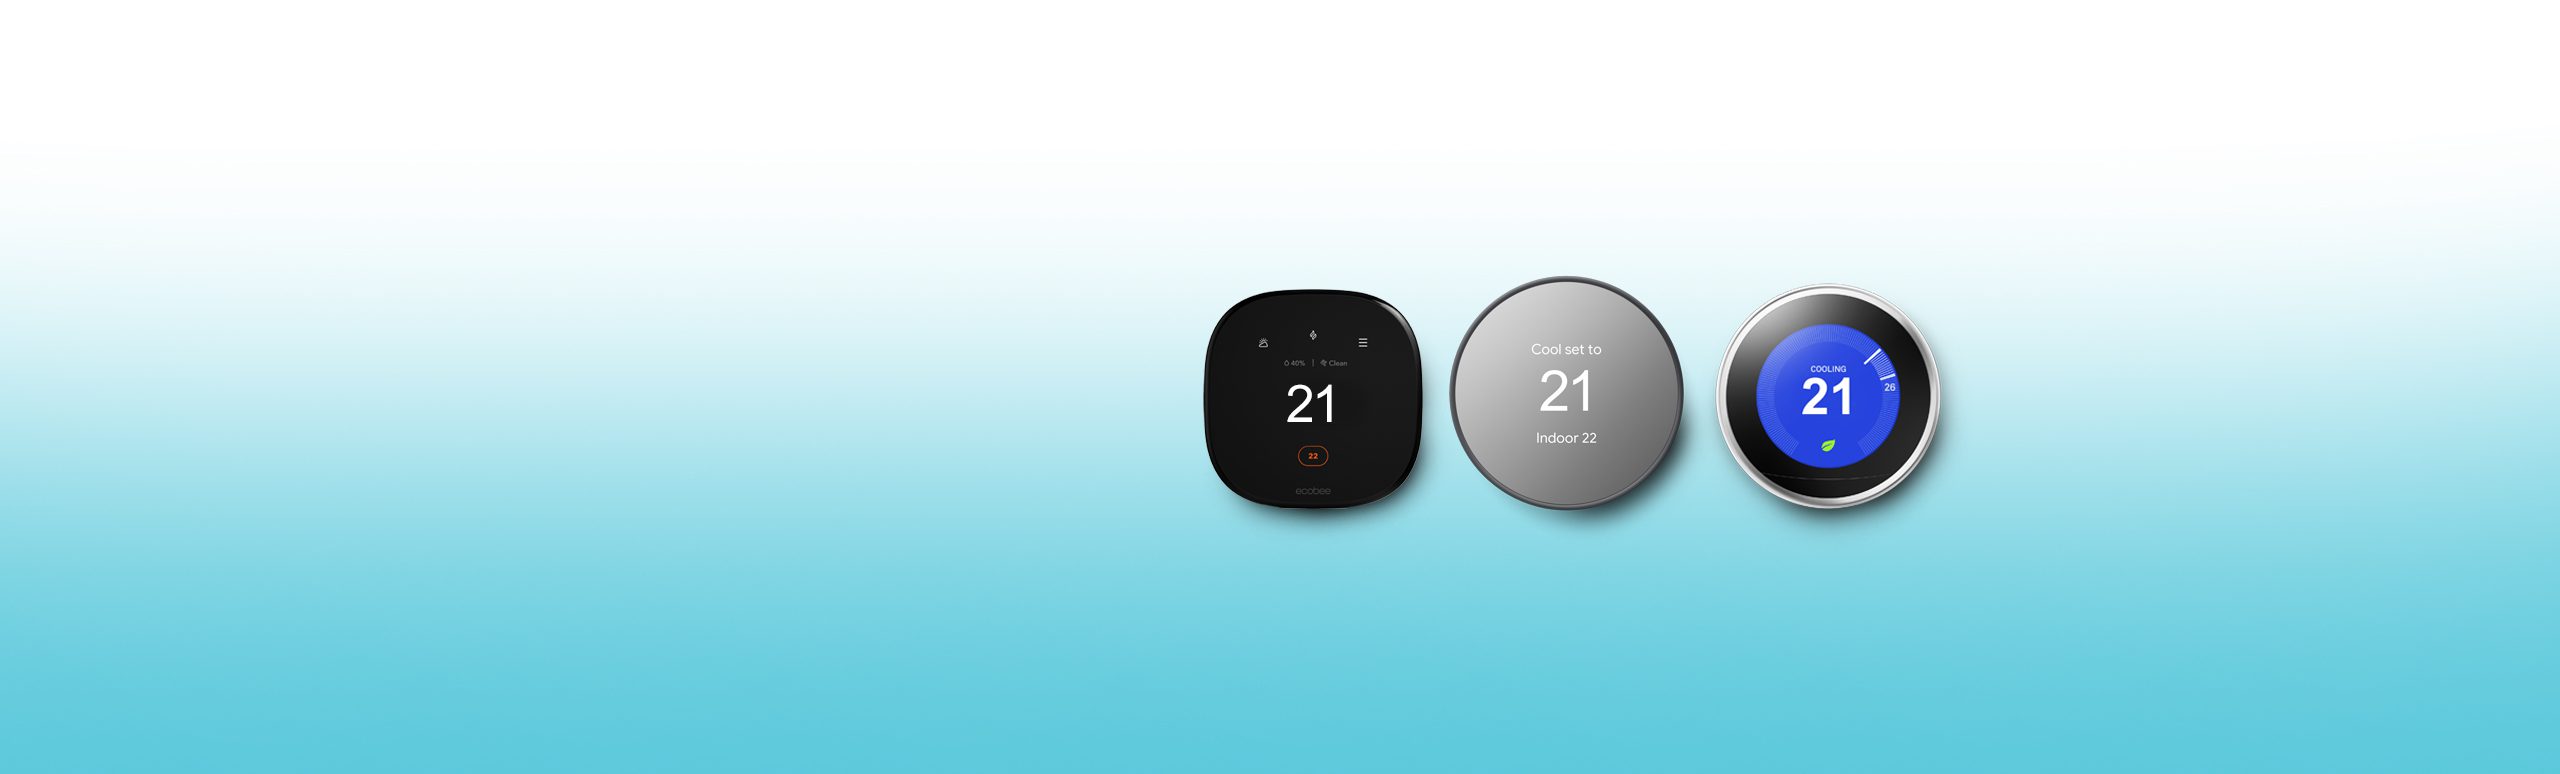 Double Perks offer with Eligible smart home thermostat featuring ecobee smart thermostat premium, Nest learning and nest thermostat